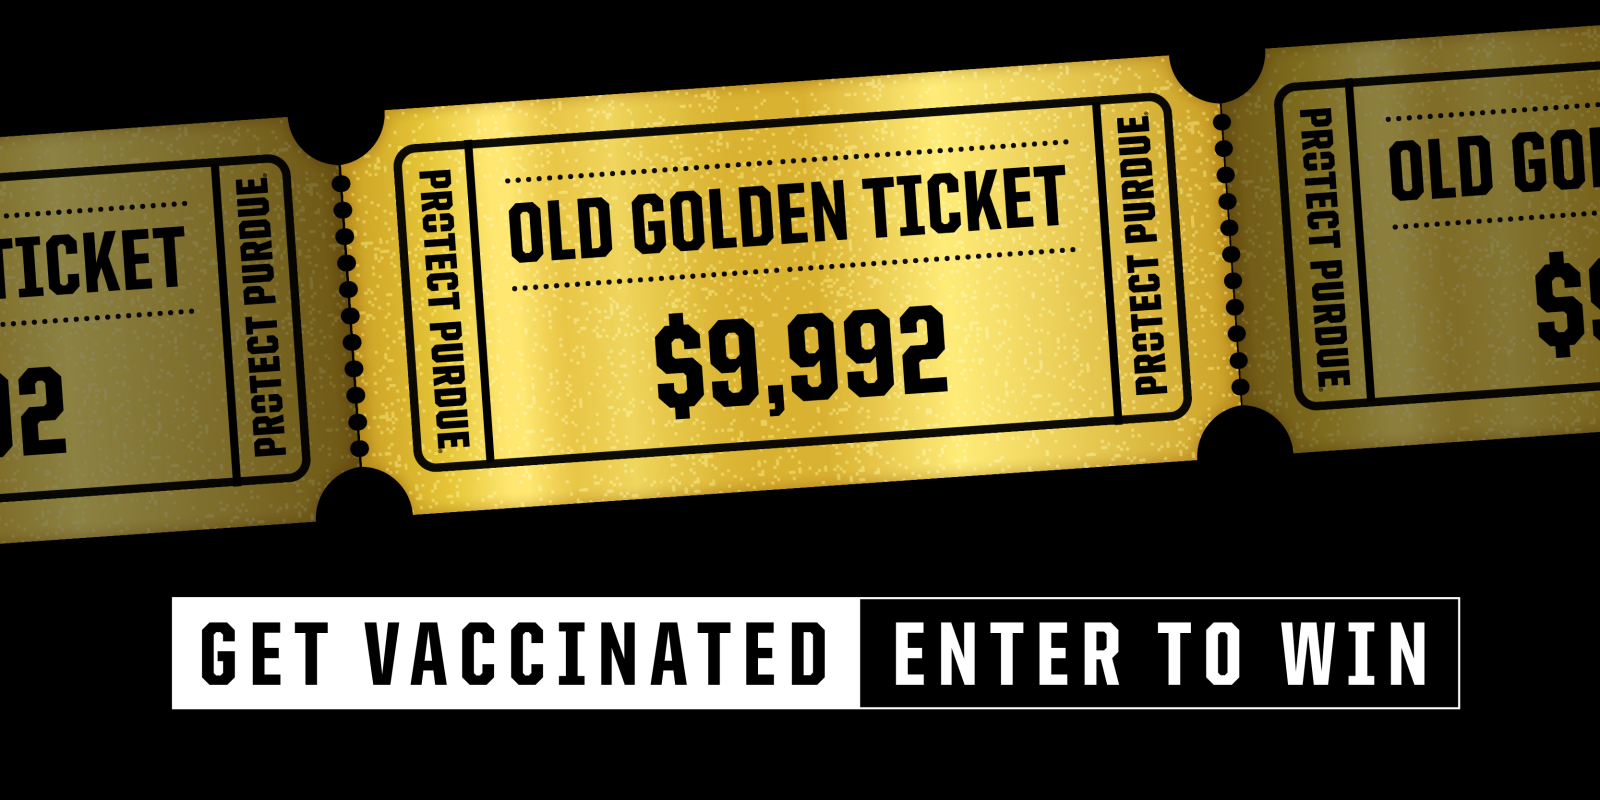 Get vaccinated enter to win; Old gold ticket $9,992